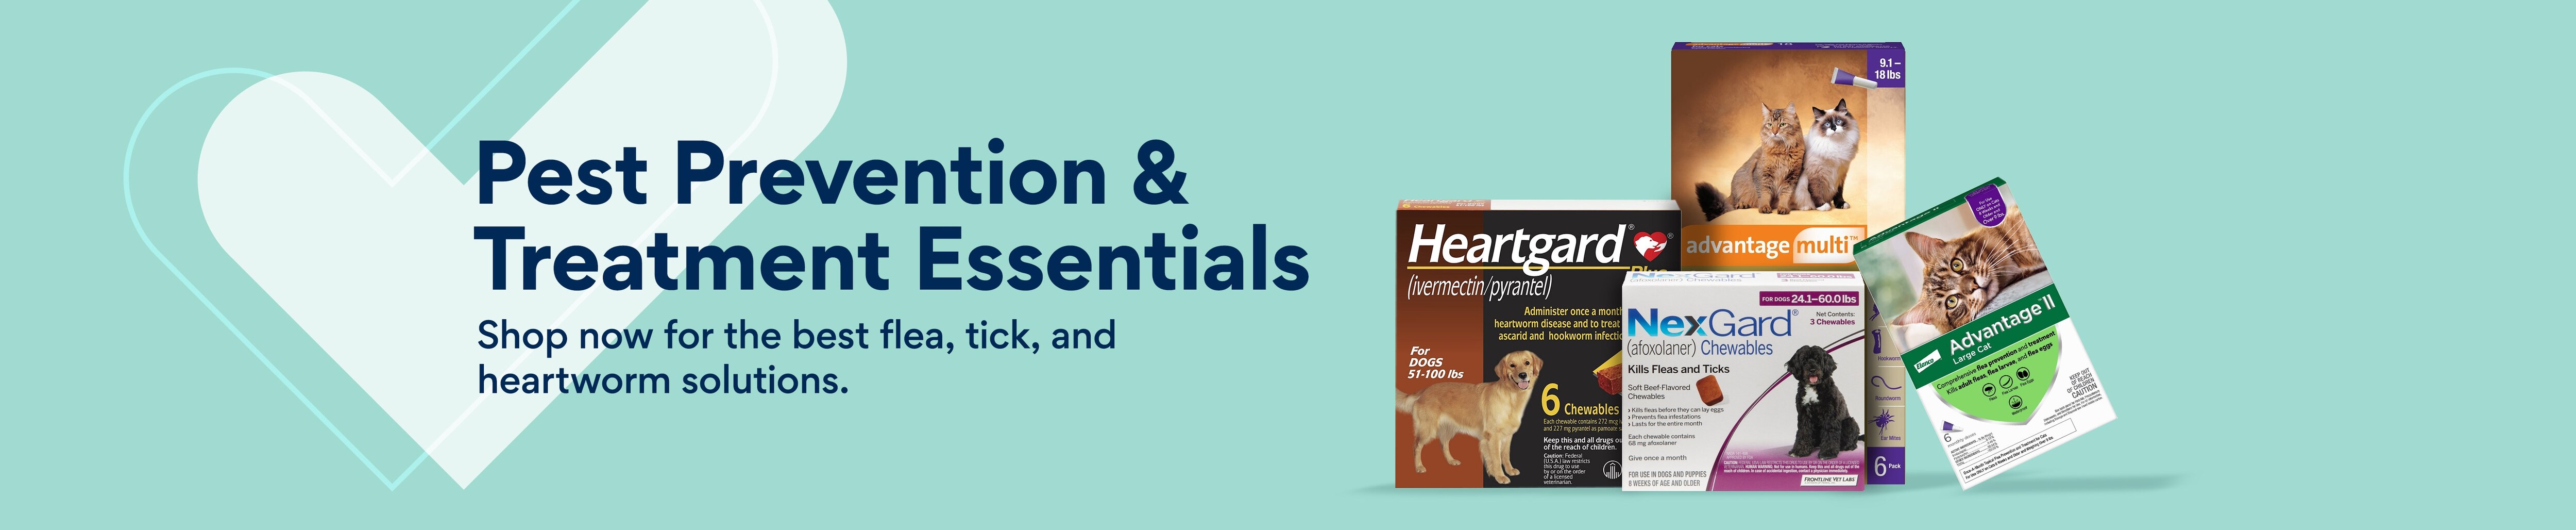 Pest Prevention & Treatment Essentials. Shop now for the best flea, tick, and heartworm solutions.